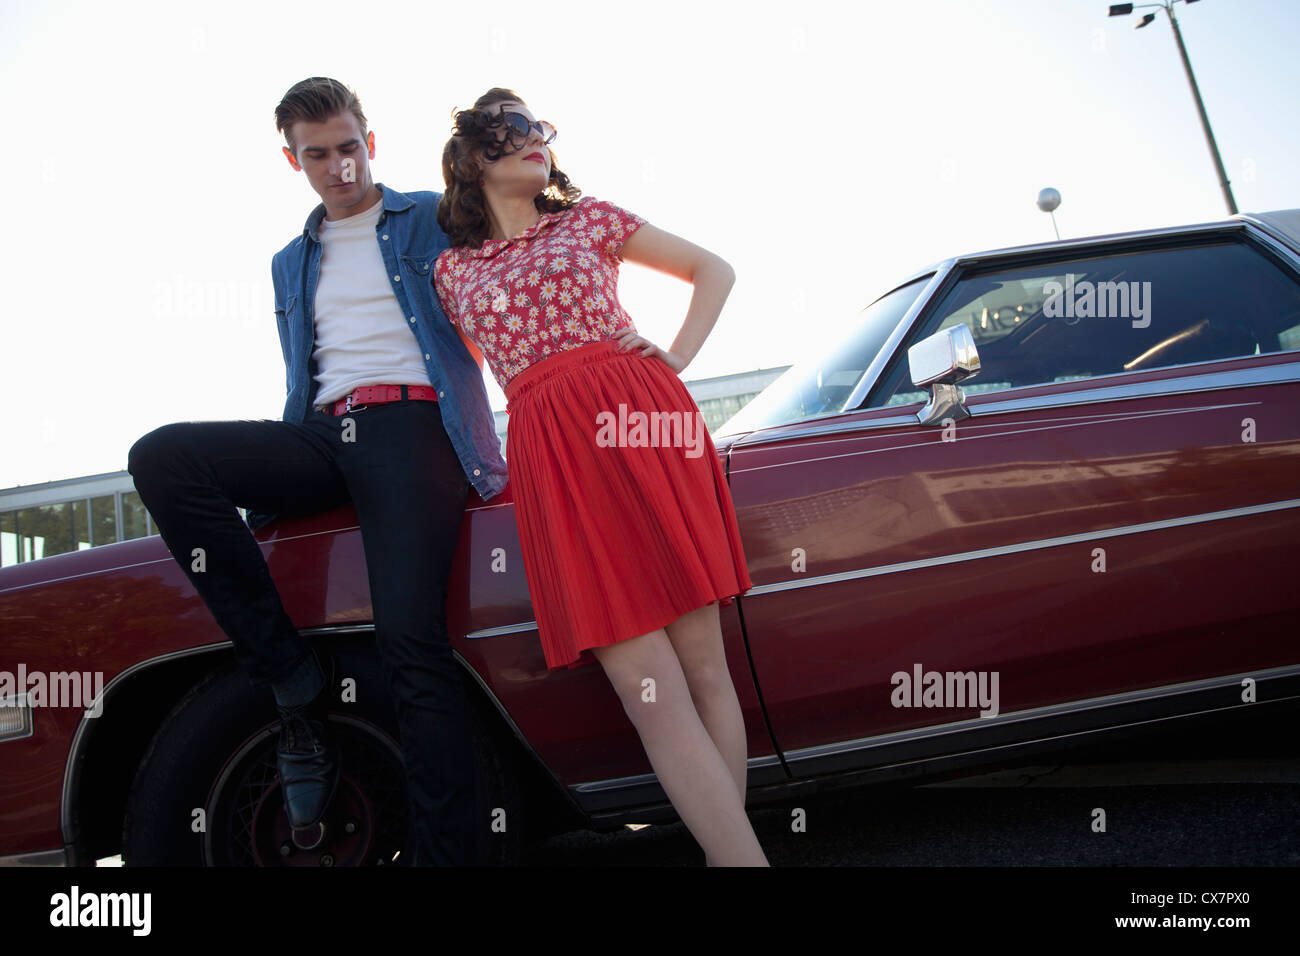 A cool, rockabilly couple leaning against a vintage car Stock Photo